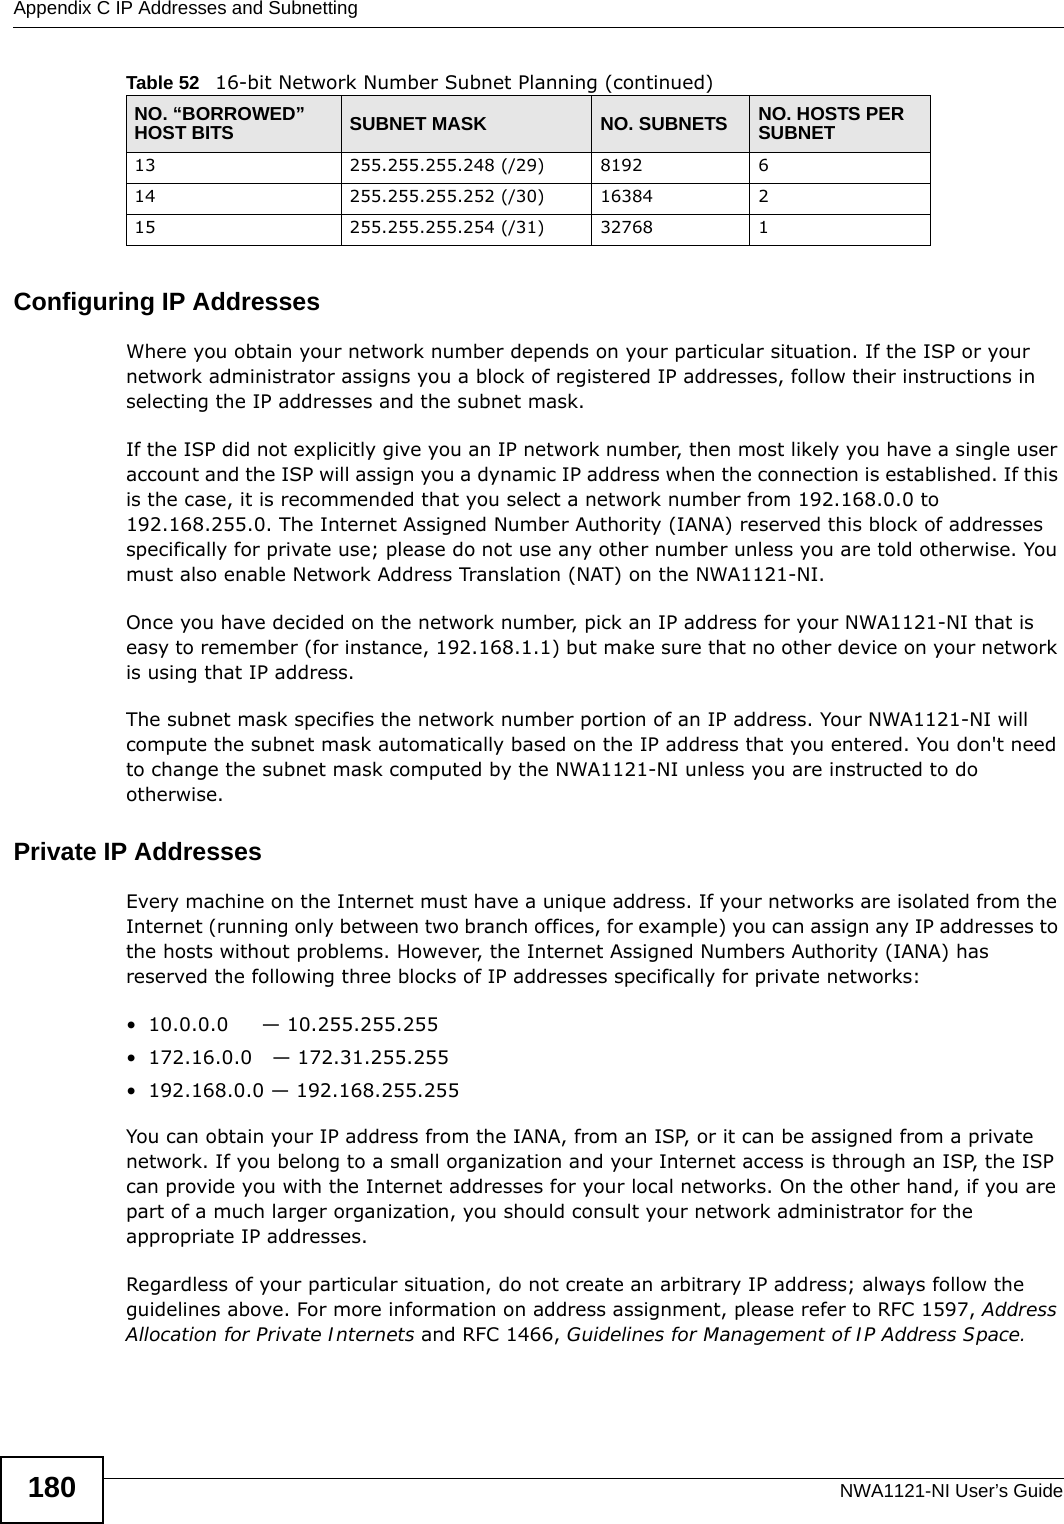 Appendix C IP Addresses and SubnettingNWA1121-NI User’s Guide180Configuring IP AddressesWhere you obtain your network number depends on your particular situation. If the ISP or your network administrator assigns you a block of registered IP addresses, follow their instructions in selecting the IP addresses and the subnet mask.If the ISP did not explicitly give you an IP network number, then most likely you have a single user account and the ISP will assign you a dynamic IP address when the connection is established. If this is the case, it is recommended that you select a network number from 192.168.0.0 to 192.168.255.0. The Internet Assigned Number Authority (IANA) reserved this block of addresses specifically for private use; please do not use any other number unless you are told otherwise. You must also enable Network Address Translation (NAT) on the NWA1121-NI. Once you have decided on the network number, pick an IP address for your NWA1121-NI that is easy to remember (for instance, 192.168.1.1) but make sure that no other device on your network is using that IP address.The subnet mask specifies the network number portion of an IP address. Your NWA1121-NI will compute the subnet mask automatically based on the IP address that you entered. You don&apos;t need to change the subnet mask computed by the NWA1121-NI unless you are instructed to do otherwise.Private IP AddressesEvery machine on the Internet must have a unique address. If your networks are isolated from the Internet (running only between two branch offices, for example) you can assign any IP addresses to the hosts without problems. However, the Internet Assigned Numbers Authority (IANA) has reserved the following three blocks of IP addresses specifically for private networks:• 10.0.0.0     — 10.255.255.255• 172.16.0.0   — 172.31.255.255• 192.168.0.0 — 192.168.255.255You can obtain your IP address from the IANA, from an ISP, or it can be assigned from a private network. If you belong to a small organization and your Internet access is through an ISP, the ISP can provide you with the Internet addresses for your local networks. On the other hand, if you are part of a much larger organization, you should consult your network administrator for the appropriate IP addresses.Regardless of your particular situation, do not create an arbitrary IP address; always follow the guidelines above. For more information on address assignment, please refer to RFC 1597, Address Allocation for Private Internets and RFC 1466, Guidelines for Management of IP Address Space.13 255.255.255.248 (/29) 8192 614 255.255.255.252 (/30) 16384 215 255.255.255.254 (/31) 32768 1Table 52   16-bit Network Number Subnet Planning (continued)NO. “BORROWED” HOST BITS SUBNET MASK NO. SUBNETS NO. HOSTS PER SUBNET